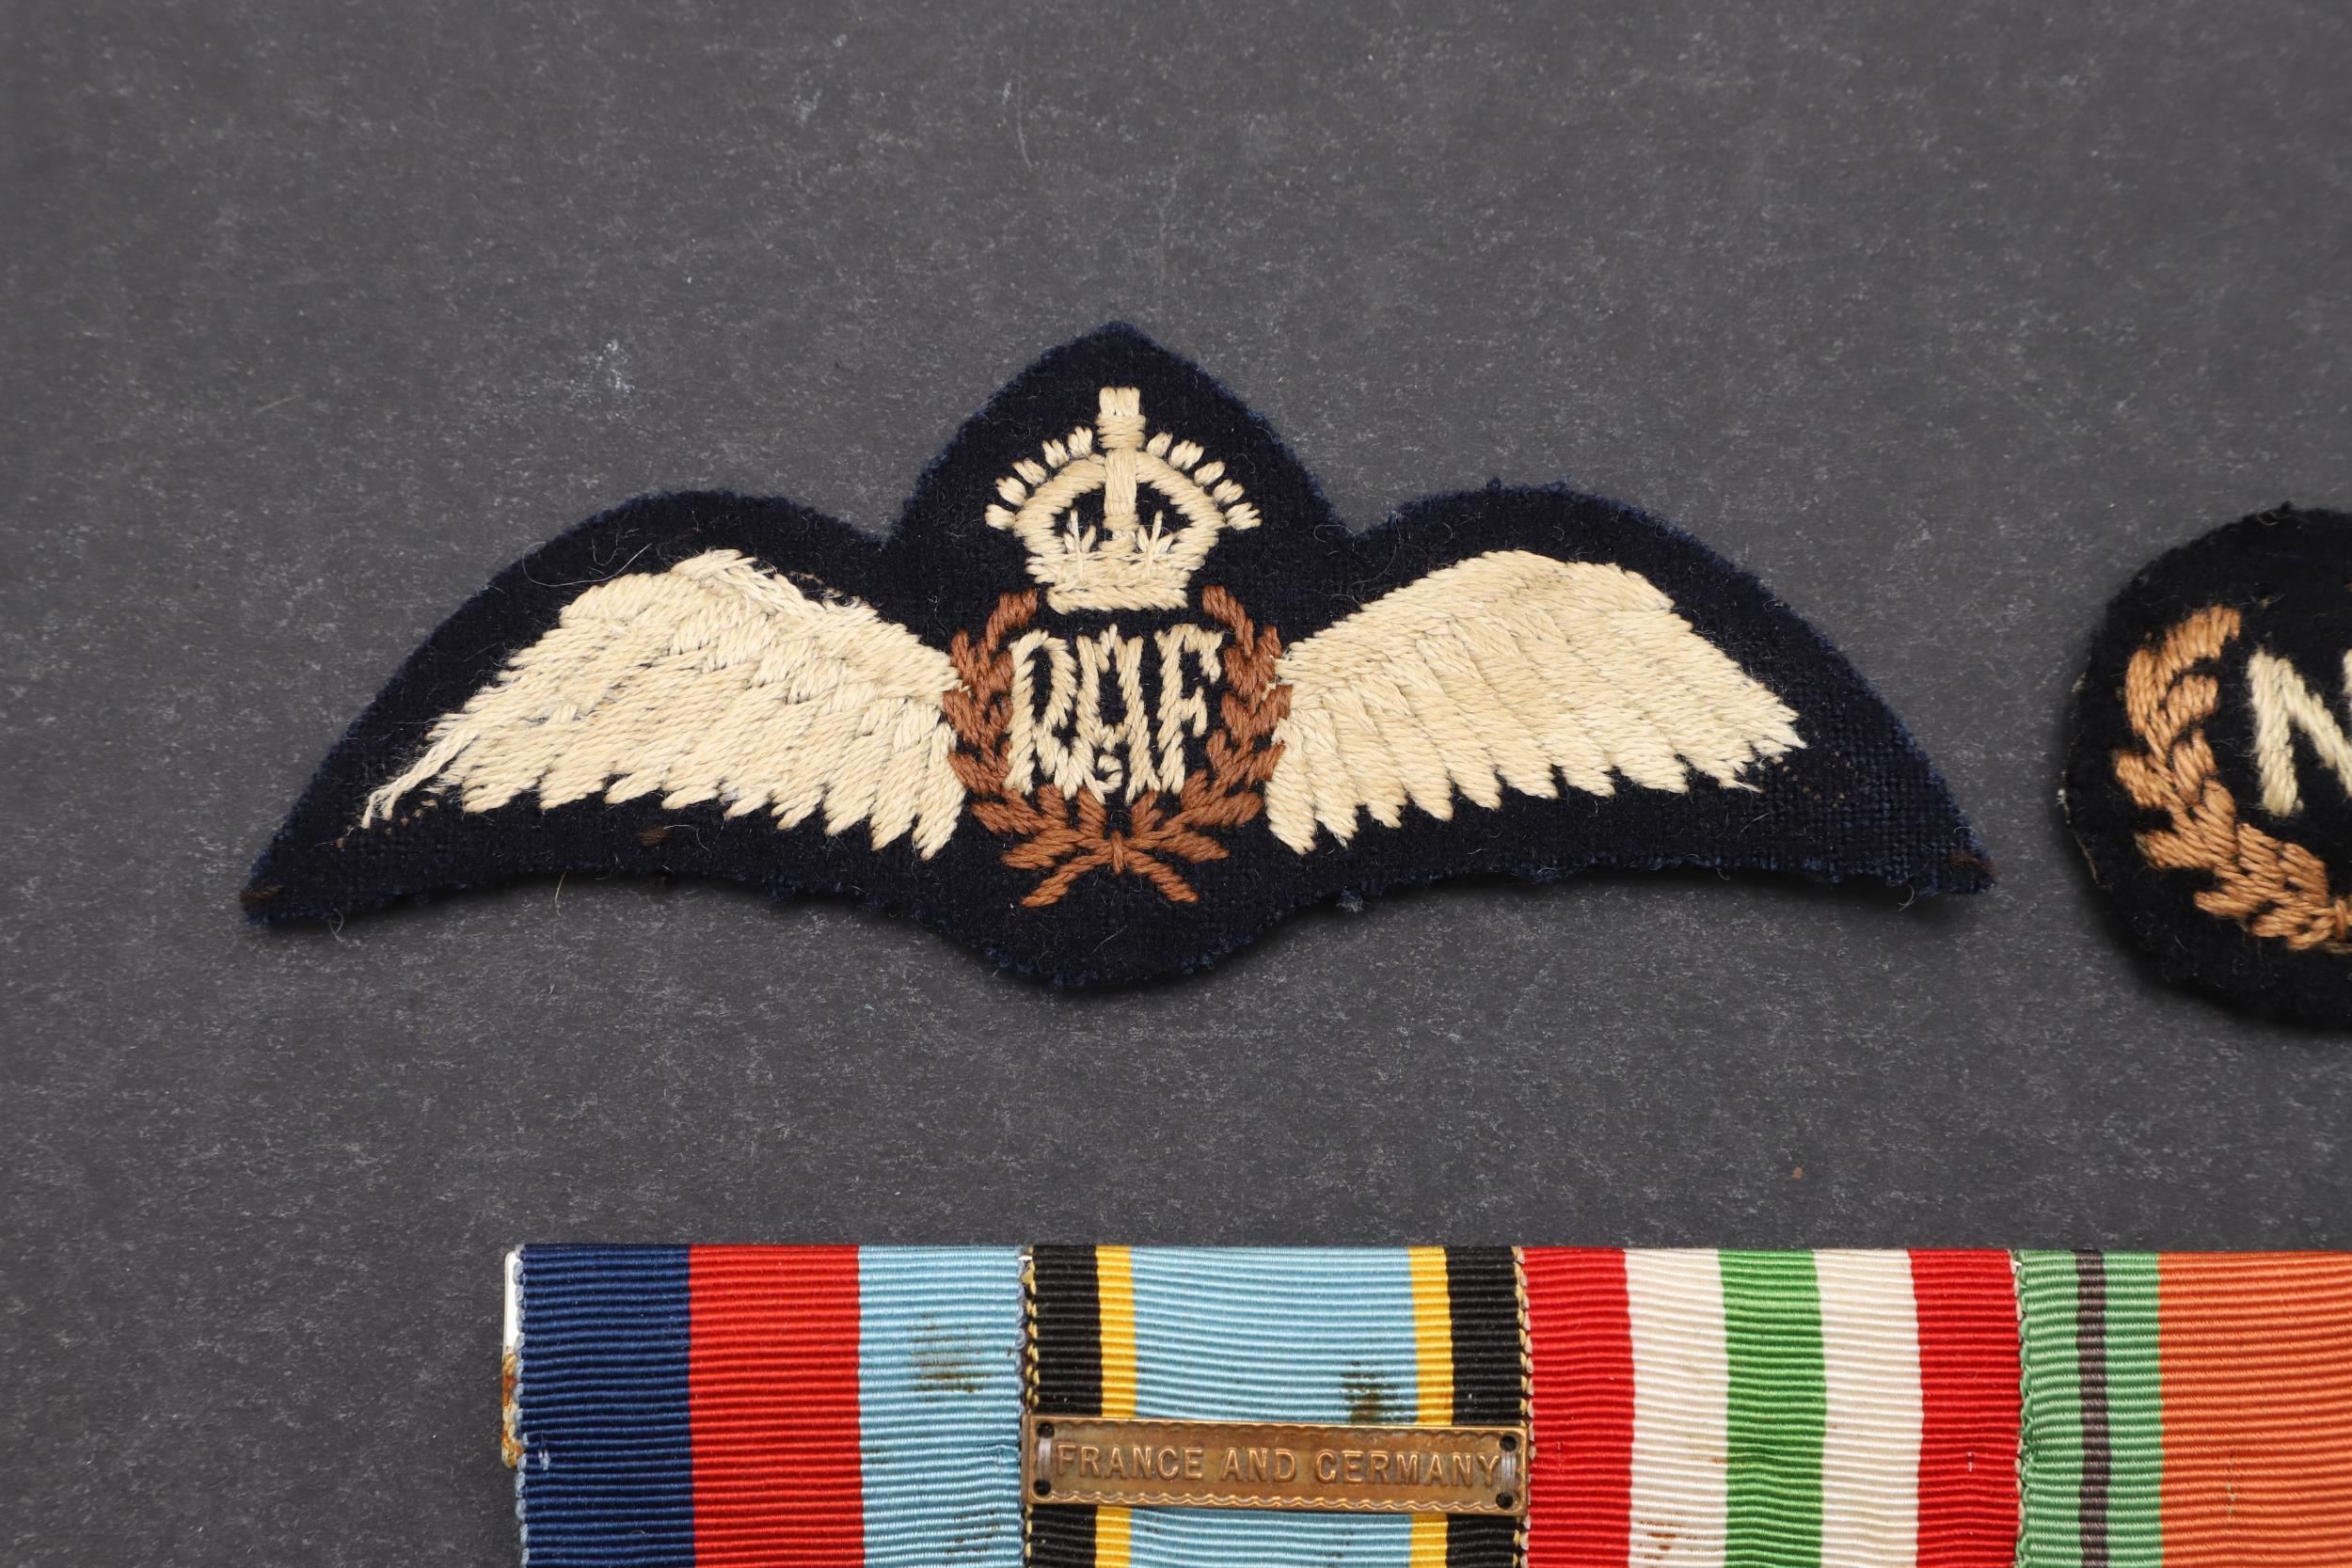 A SECOND WORLD WAR GROUP OF FIVE INCLUDING AIR CREW EUROPE STAR. - Image 2 of 5